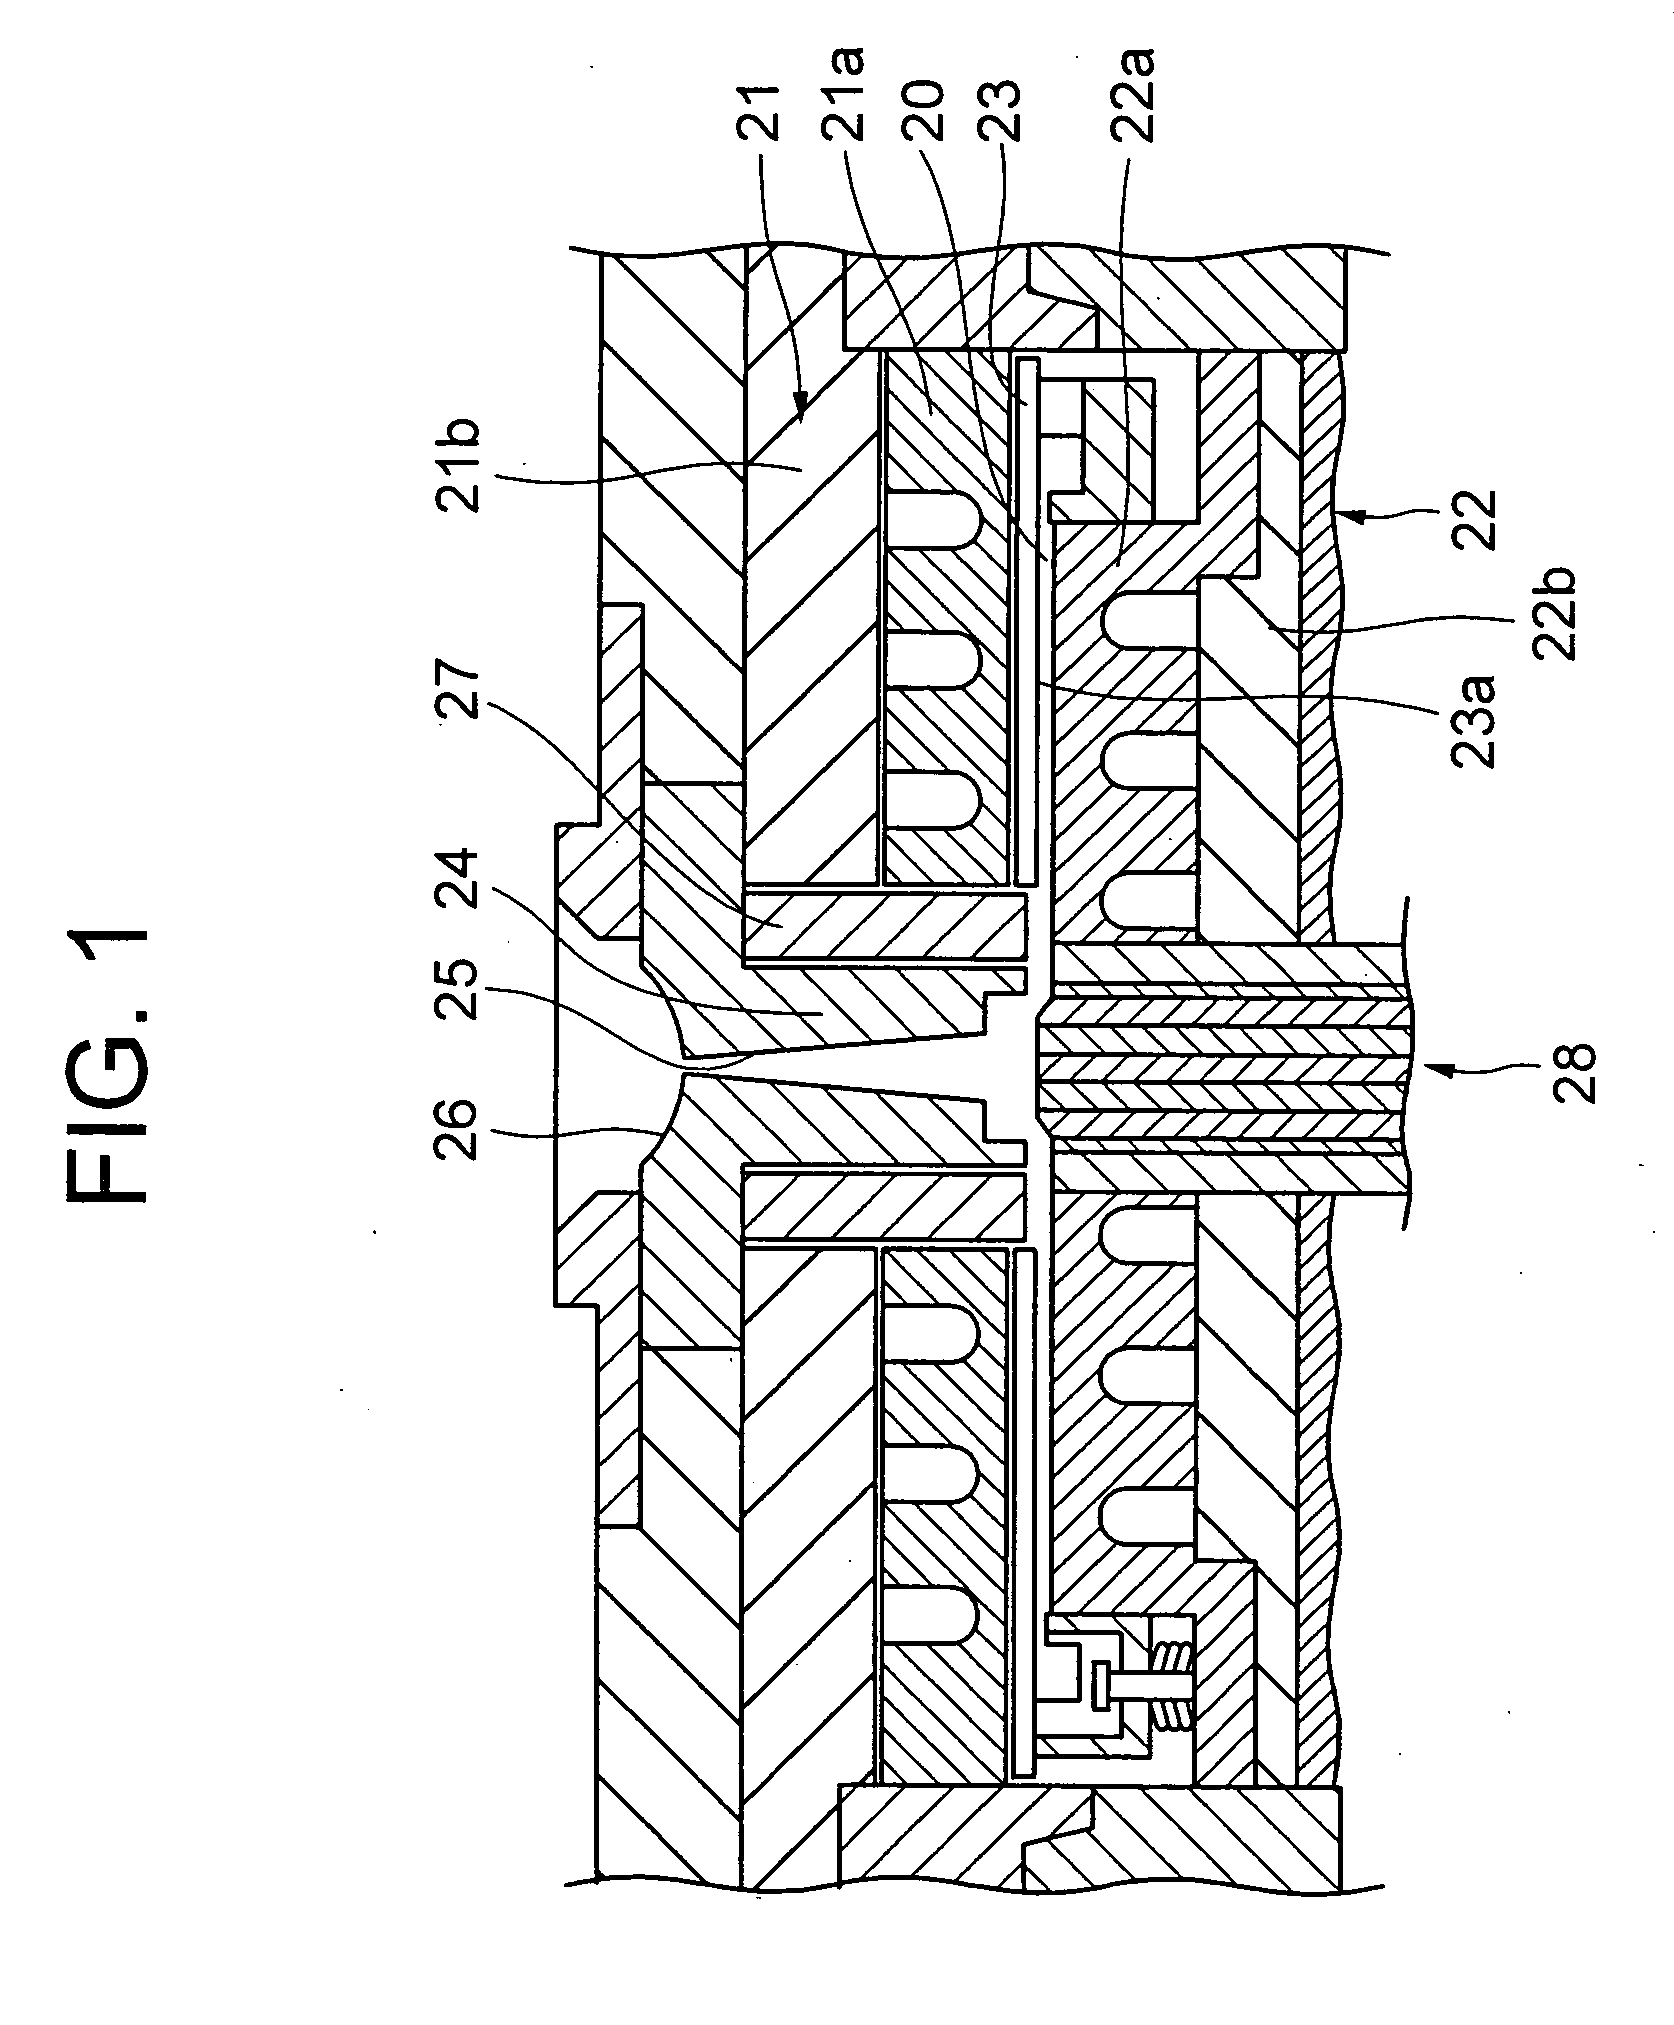 Molding mold, substrate for optical disc, and optical disc